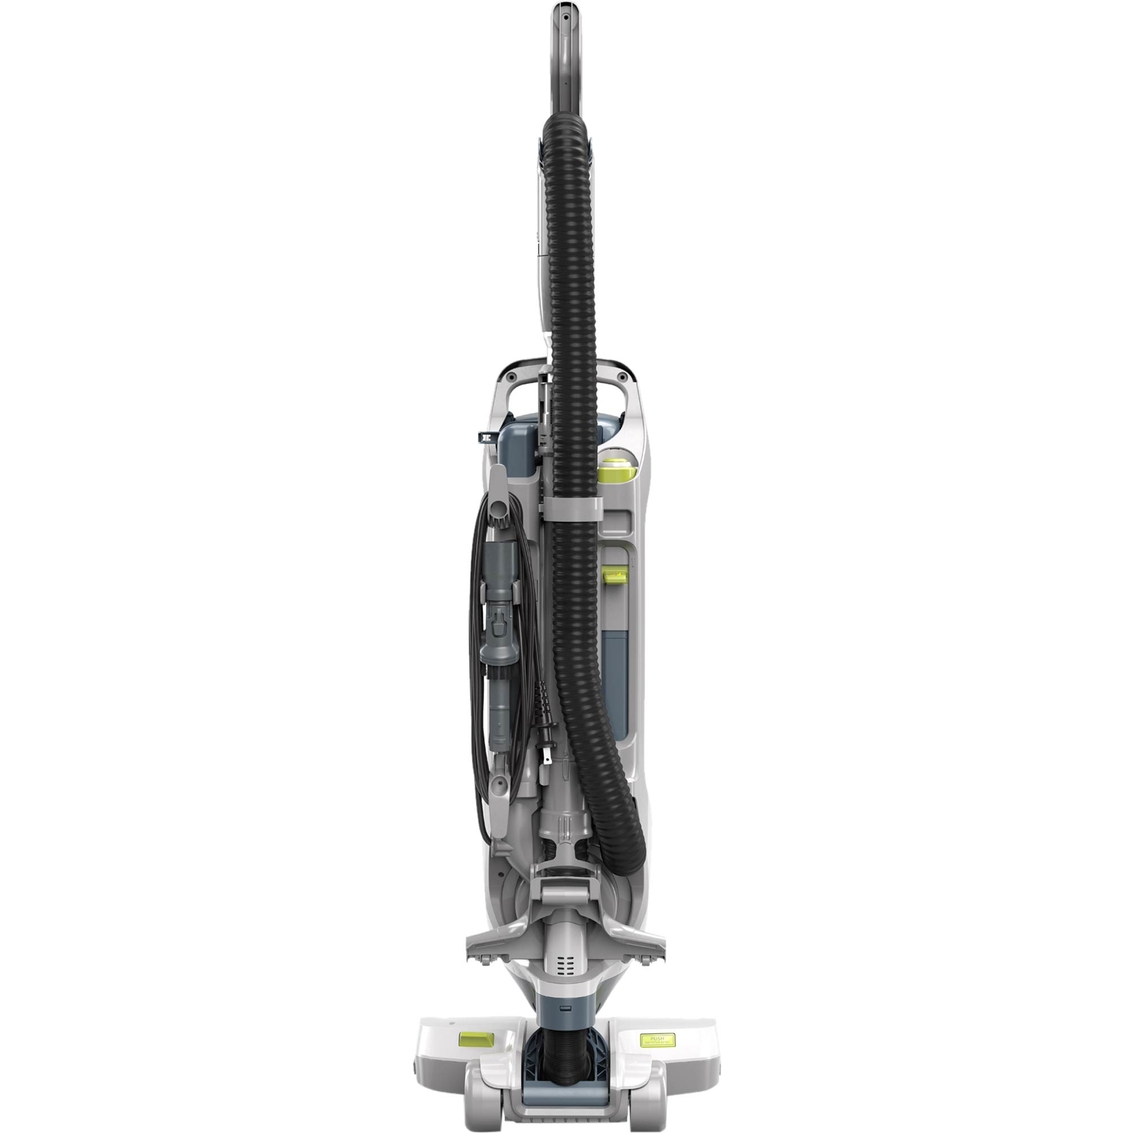 Kenmore Pet Friendly CrossOver Max Upright Vacuum - Image 2 of 2